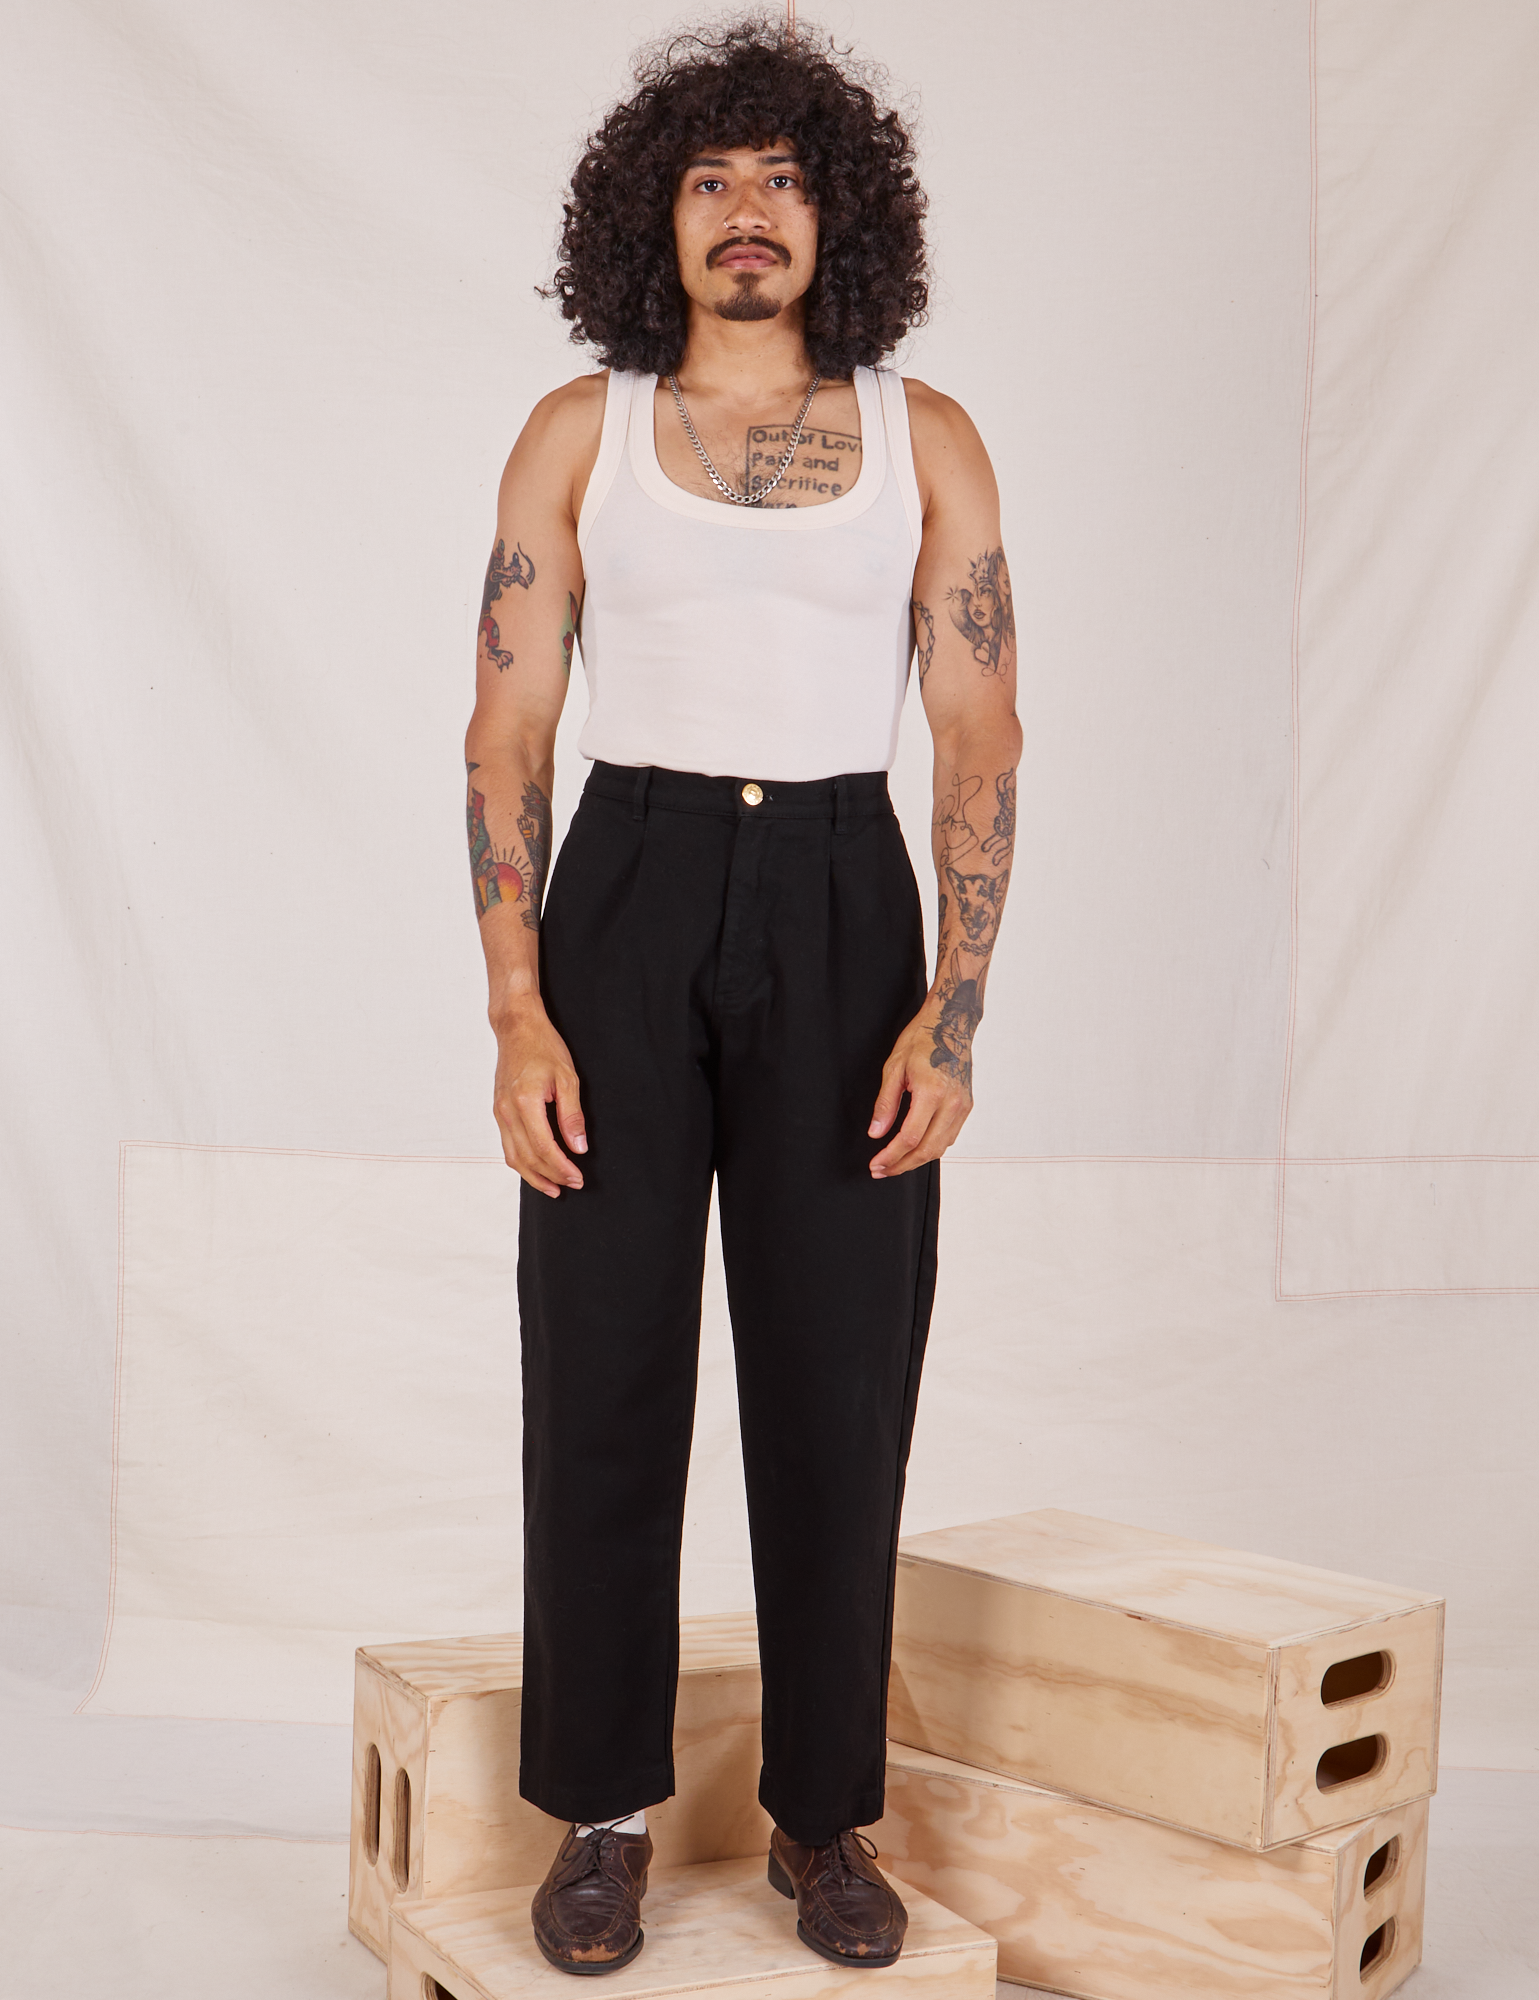 Jesse is 5&#39;8&quot; and wearing XXS Denim Trouser Jeans in Black paired with a vintage off-white Tank Top